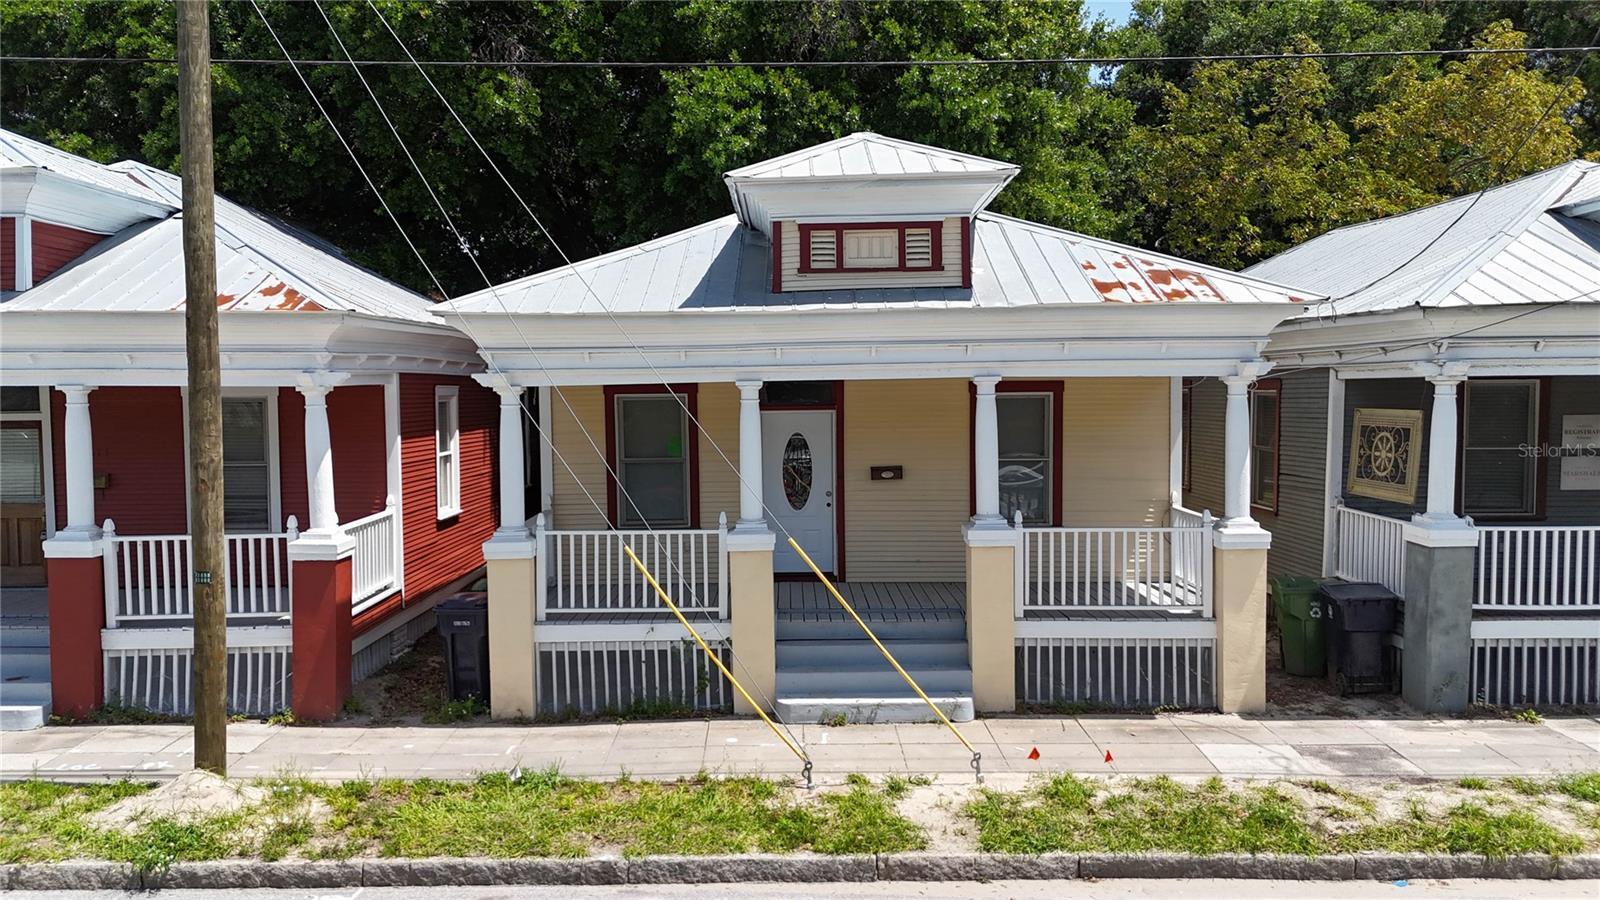 Photo one of 2609 N 15Th St Tampa FL 33605 | MLS T3513941